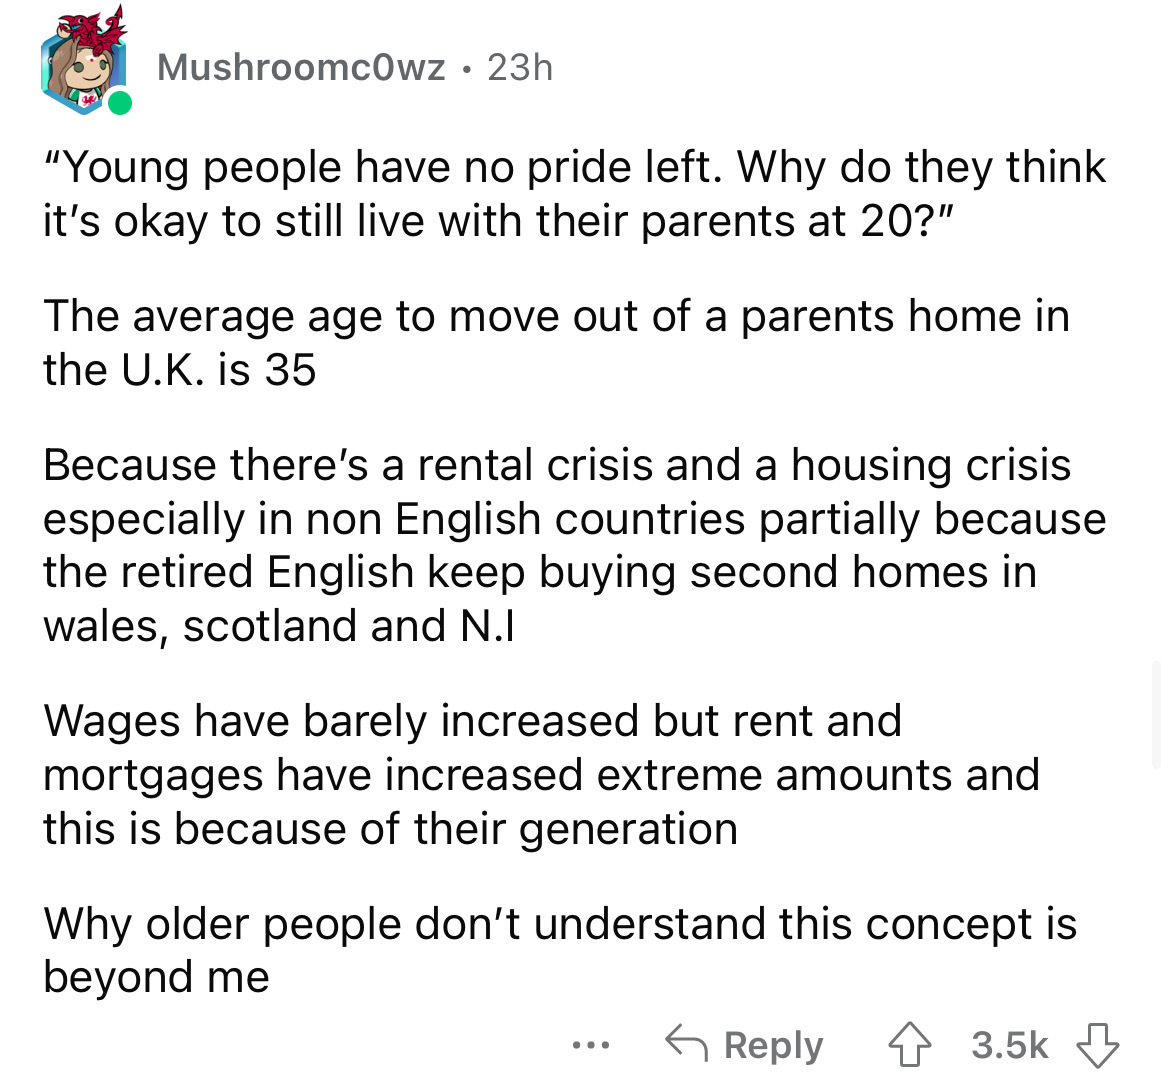 angle - Mushroomc0wz 23h "Young people have no pride left. Why do they think it's okay to still live with their parents at 20?" The average age to move out of a parents home in the U.K. is 35 Because there's a rental crisis and a housing crisis especially